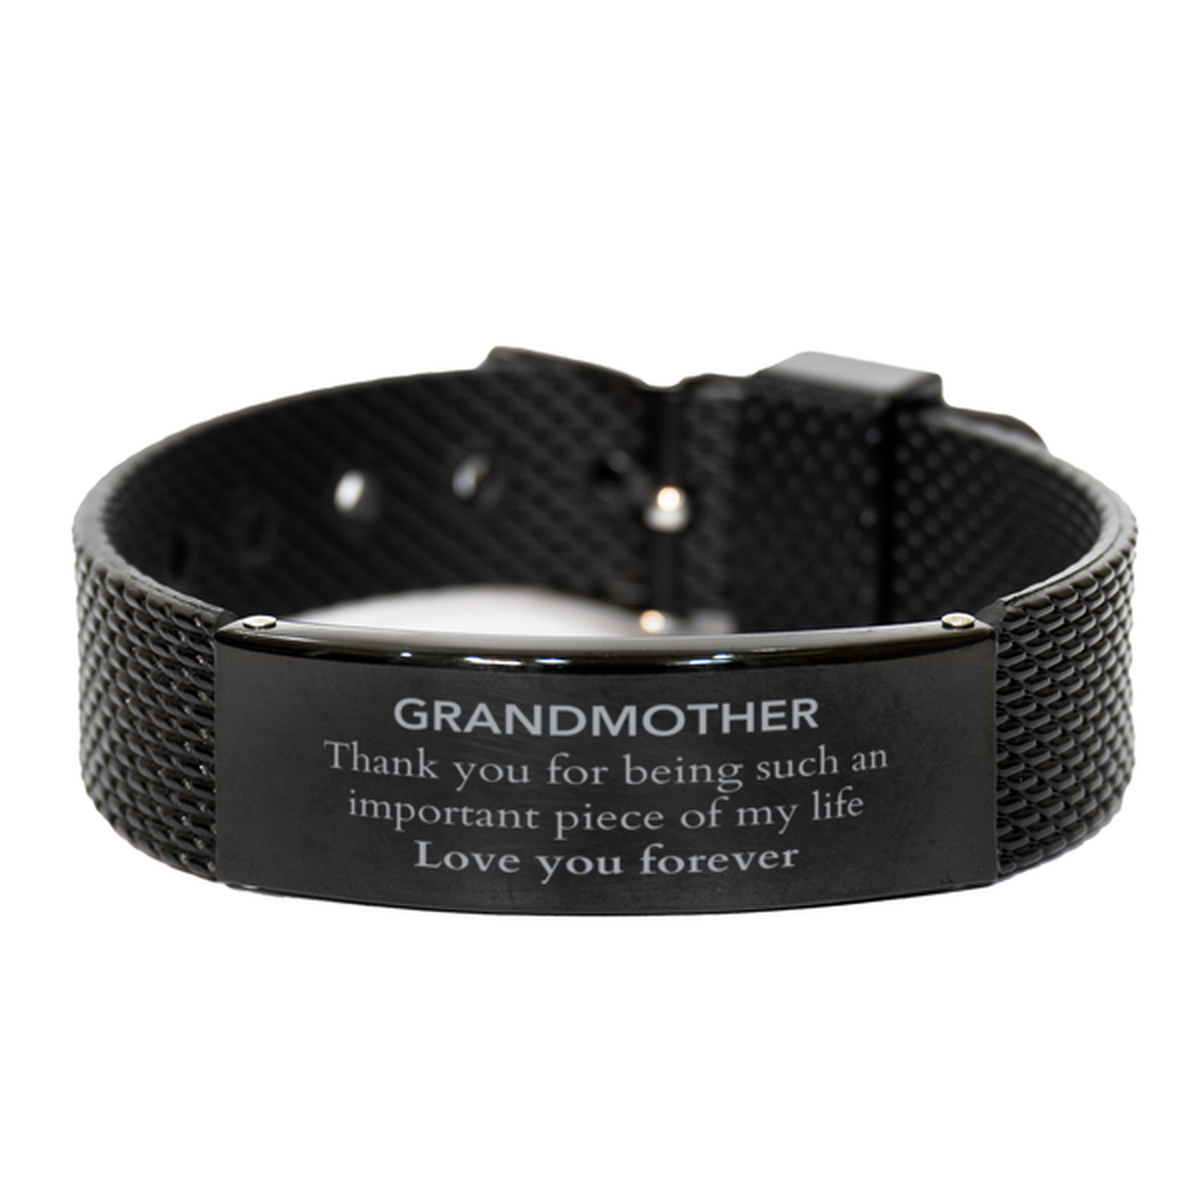 Appropriate Grandmother Black Shark Mesh Bracelet Epic Birthday Gifts for Grandmother Thank you for being such an important piece of my life Grandmother Christmas Mothers Fathers Day